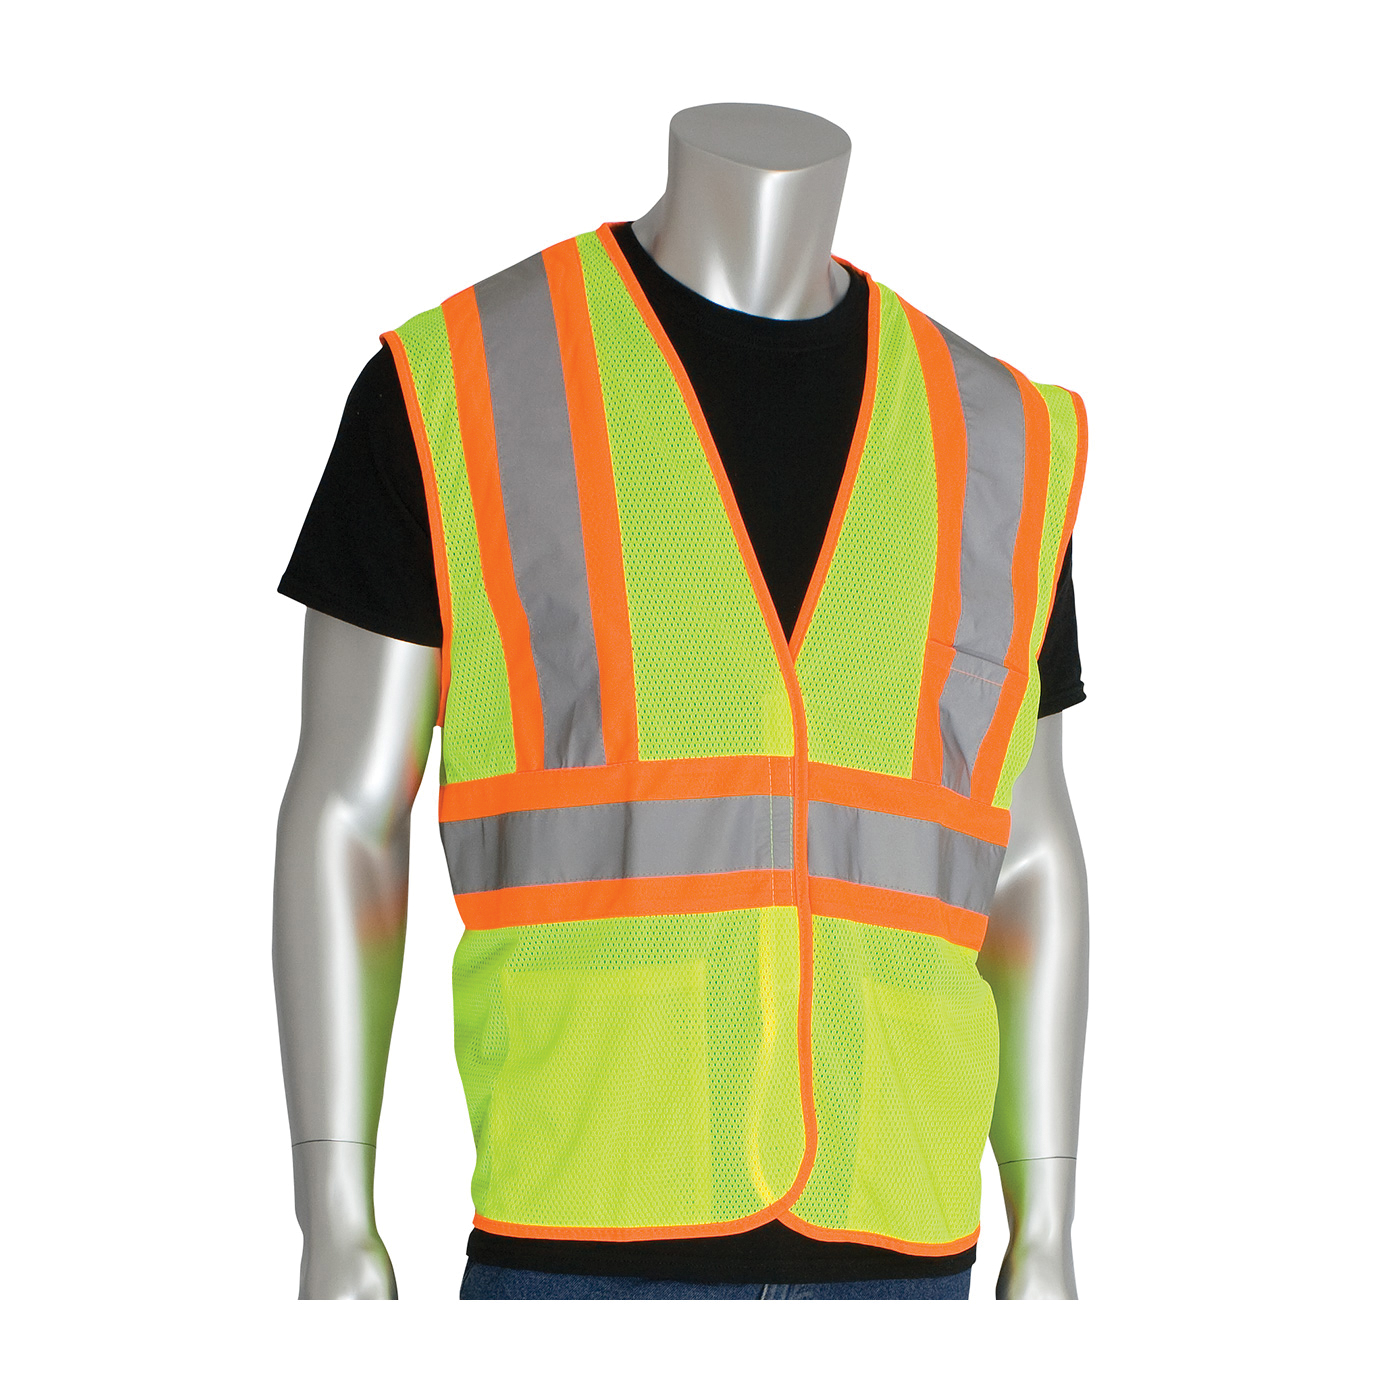 PIP® 302-MVATLY-L 2-Tone Safety Vest, L, Hi-Viz Lime Yellow, Polyester, Hook and Loop Closure, 3 Pockets, ANSI Class: Class 2, Specifications Met: ANSI Specified